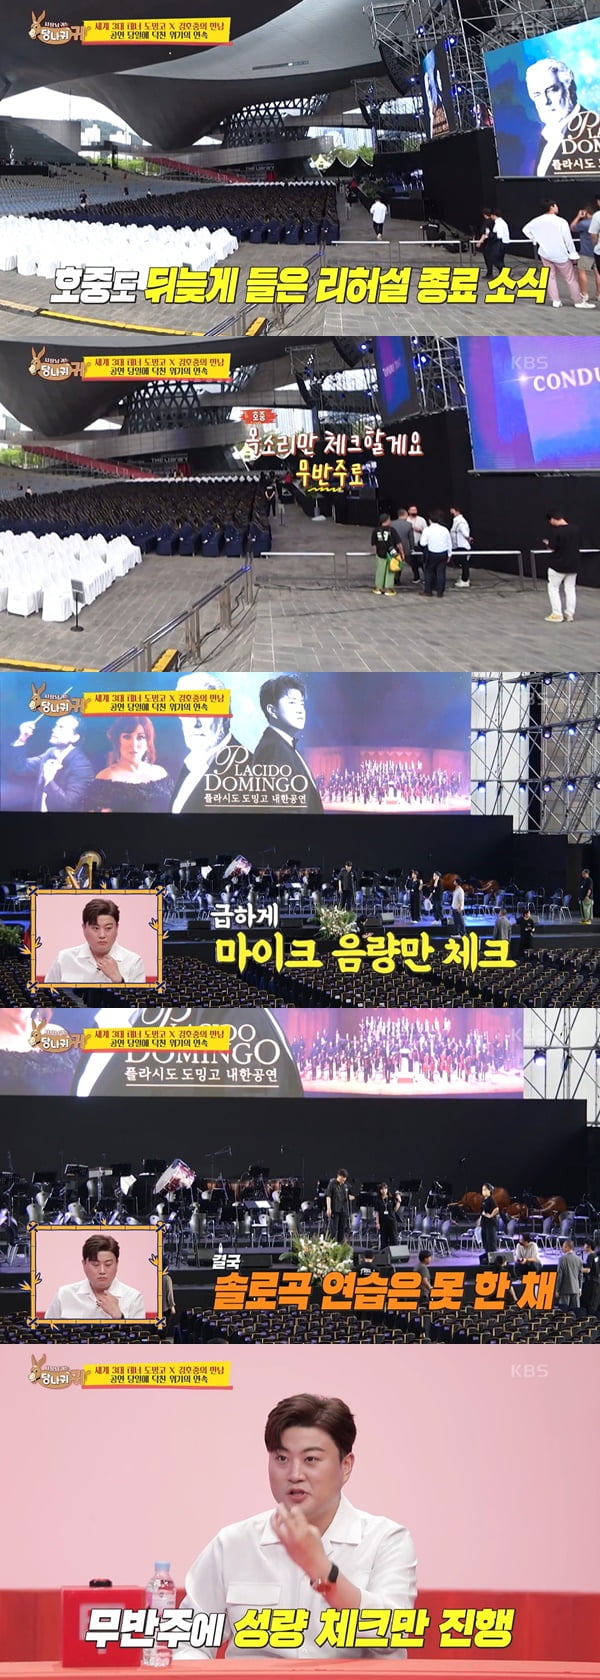 Singer Kim Ho-joong showed the stage of the placedo Domingo and Duets.In KBS2 Boss in the Mirror broadcast on the 31st of last month, Kim Ho-joong was portrayed as a historical performance scene with vocal legend Placido Domingo.On the show, Kim Ho-joong faced a sudden suspension of rehearsals at the vocal cord nodule ahead of the performance, a situation that must be rushed due to the audience gathered more than expected.Kim Ho-joong was later told of the end of rehearsals, he asked: How do I fit the volume?Ill check my voice without any accompaniment, he said, checking only the volume of the microphone. Eventually, the solo song was not practiced and the rehearsal was over.Kim Ho-joong explained, I wanted to deal with the unfinished music here yesterday, but it was over and I had to check how my voice came back to some extent without any accompaniment.To make matters worse, no shirt buttons came. Kim Ho-joong said, Its totally crazy.If it doesnt work, you should wear your clothes, said Kim Ho-joongs friend Lee Jae-myung, what the hell is this case?I think its going too well today. Kim Ho-joong said, I made a cuff directly, not just a button, because I wanted to pay like an orthodox classic.That was the only thing that was there, he said.Kim Ho-joong said, I can laugh now, but at that time it was really an accident if I did not have a renaming. He added, I only thought I would leave my neck to the facts.Kim Ho-joong started preparing to take the stage in Mr. Jae-myeongs shirt - but his face was full of worry.Kim Ho-joong also said, The reason I first started music was because of Nessun Dorma and Pavarotti.When I heard the Pavarotti CD, I thought, I want to be such a singer. In a way, the song that came to this place was Nessun Dorma. Kim Ho-joong presented Lucia Di Lammermoor as the first stage, followed by Nessun Dorma stage.After completing the solo, he was enthusiastically cheered; Kim Ho-joong staged the Duets in time for Placido Domingo and My Way.Kim Ho-joong stood next to Placido Domingo while singing: I wanted to sing it with you.I went to the side because I wanted to come back to me someday. Kim Ho-joong said, I thought I was a really happy person because I could deliver this music with Mr. Domingo.After the stage, Placido Domingo and his wife, who found Kim Ho-joong at the backstage, praised the wife of Placido Domingo for being very good.Placido Domingo also said, Our stage was very good, next time well be together as our Duets; not only that, but Kim Ho-joong said, We still have a bleak time.Finally, Kim Ho-joong said, I think that both Placi and Domingo have shown the way Andrea Bocelli is going.I would like to show the figure of Kim Ho-joong singing, not Vocalists Kim Ho-joong, Trot singer Kim Ho-joong, along the way. 